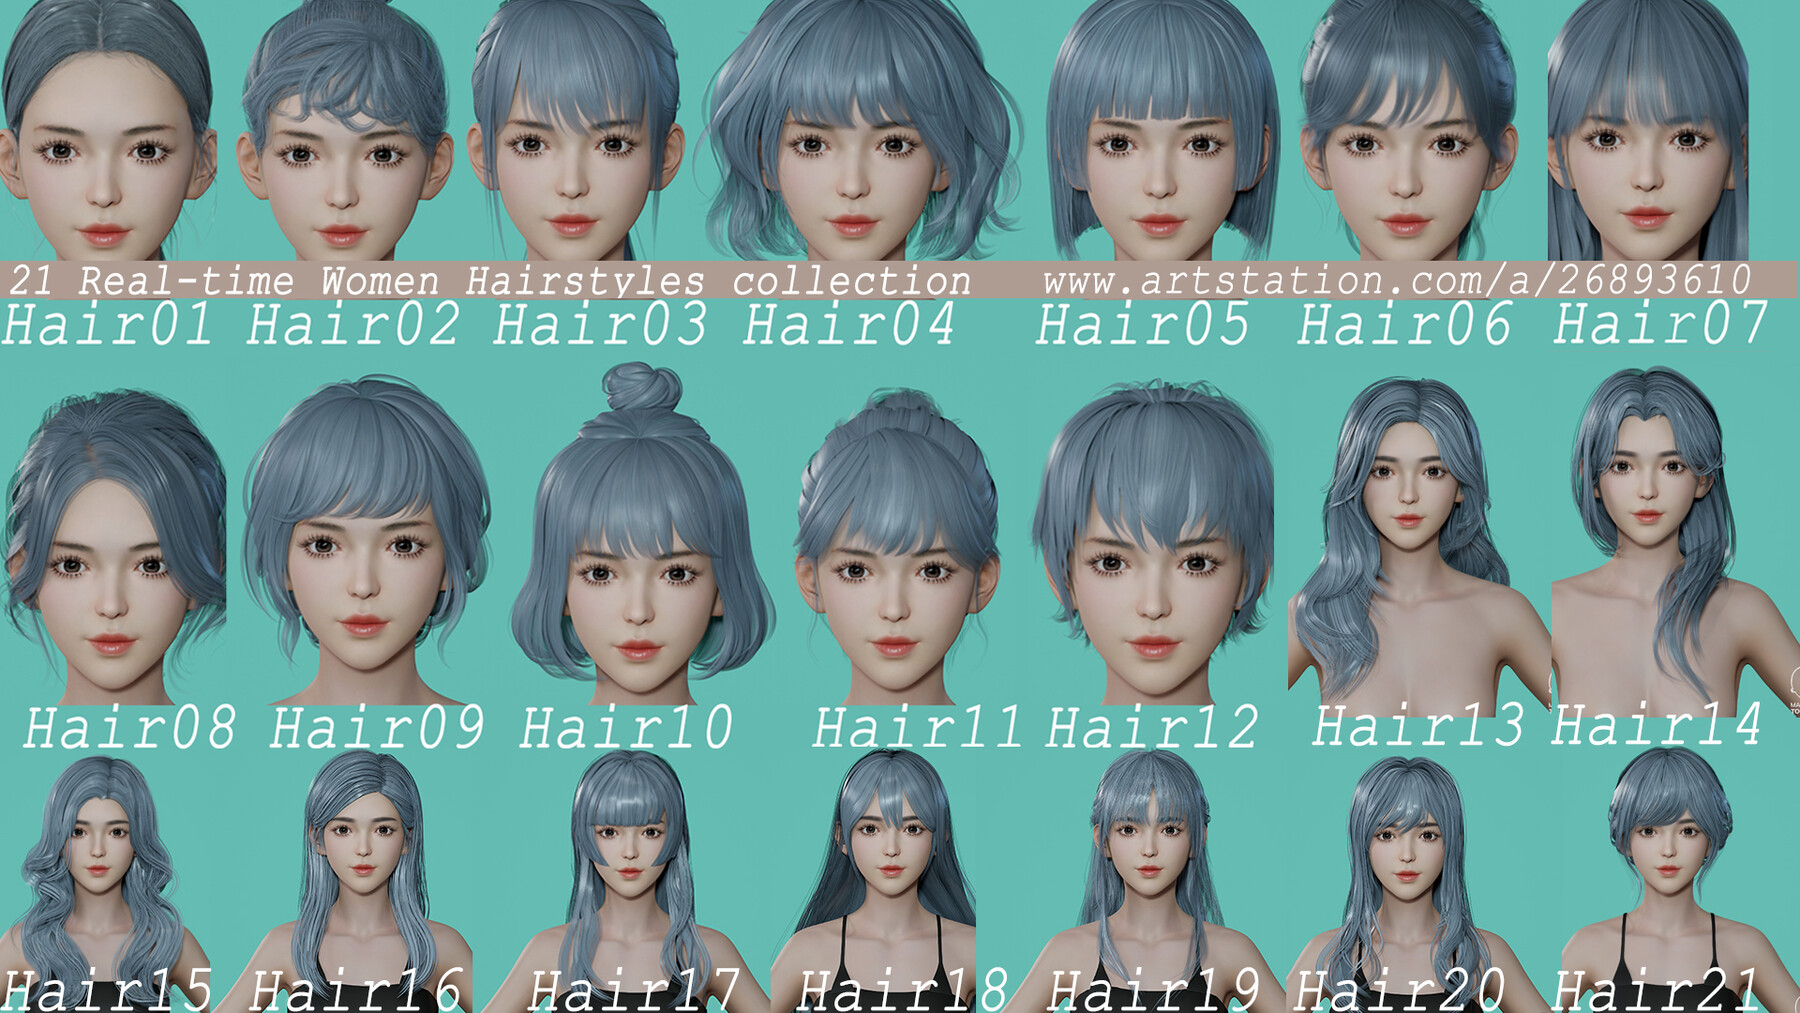 Gallery of realistic anime hairstyles to use with wildcards : r